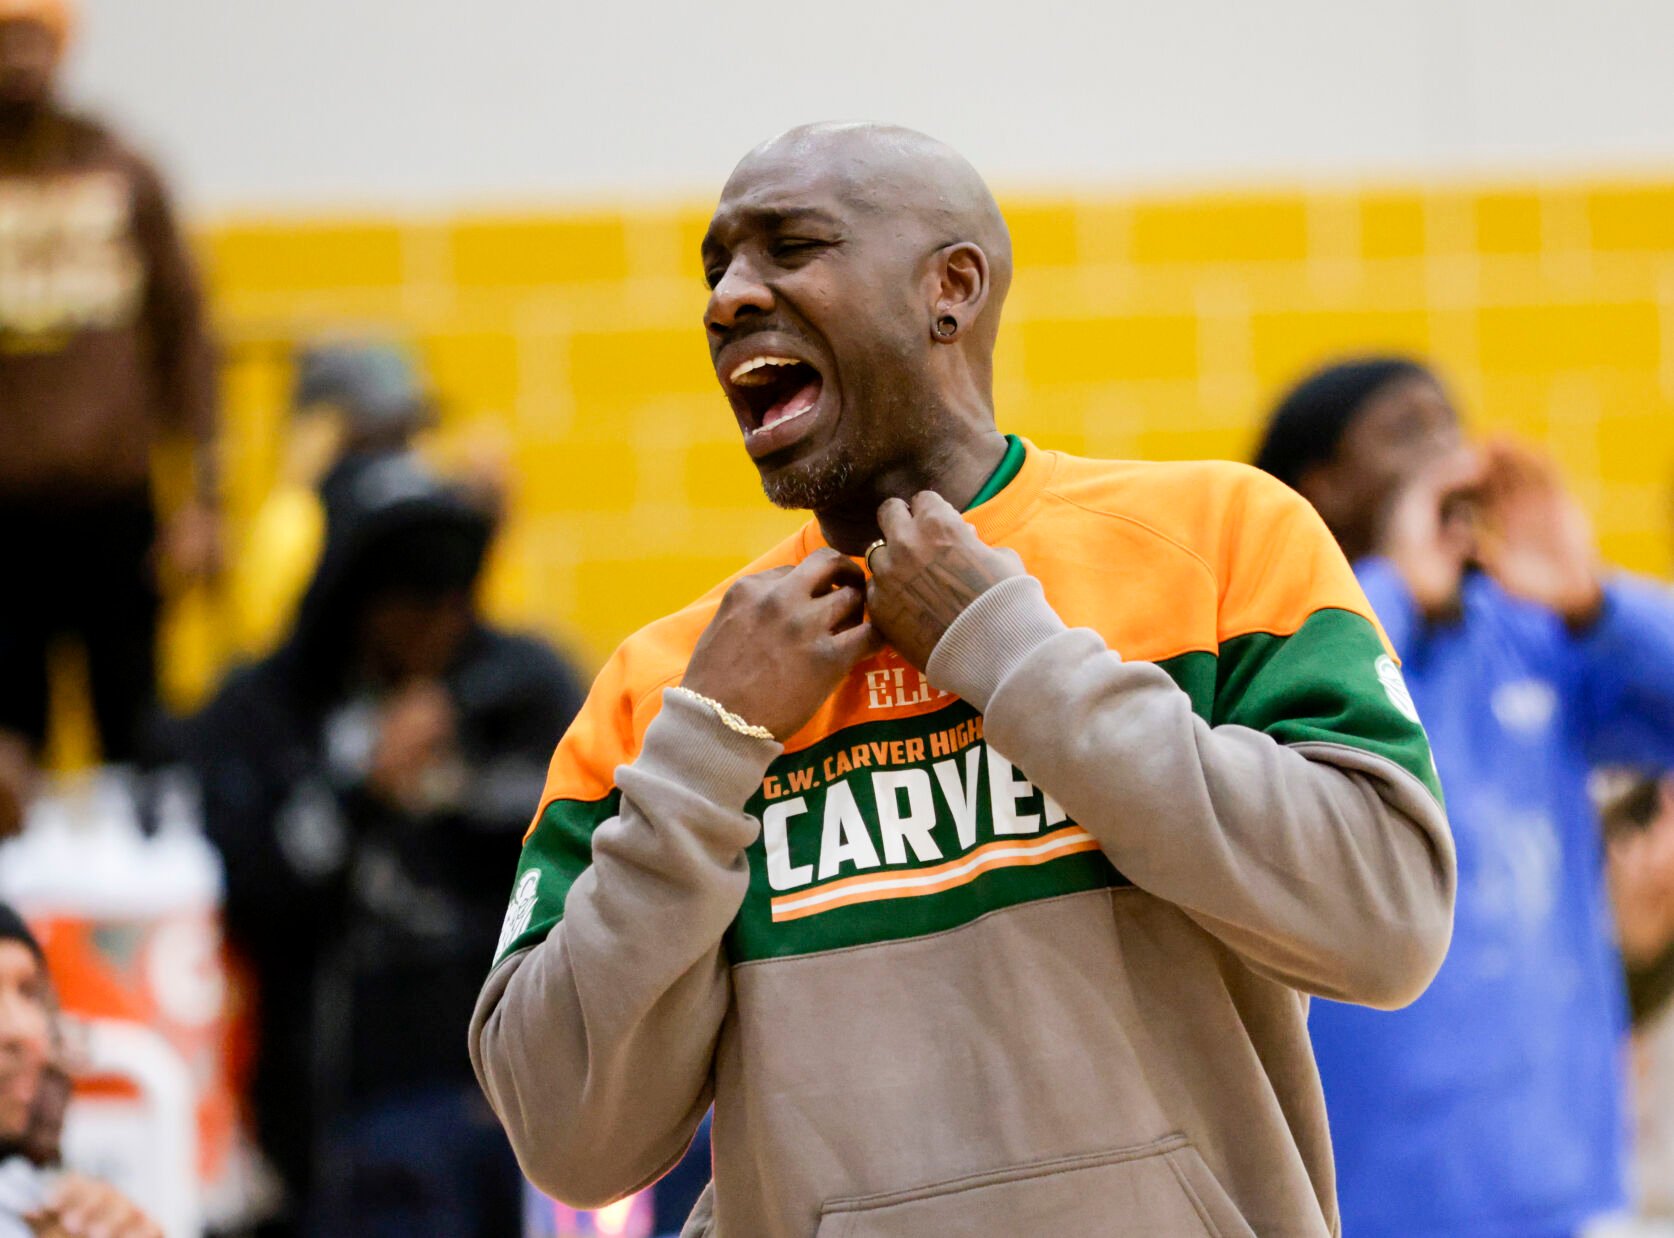 Carver vs Peabody: Second Year Semifinal Showdown Ends in Thrilling 48-52 Victory